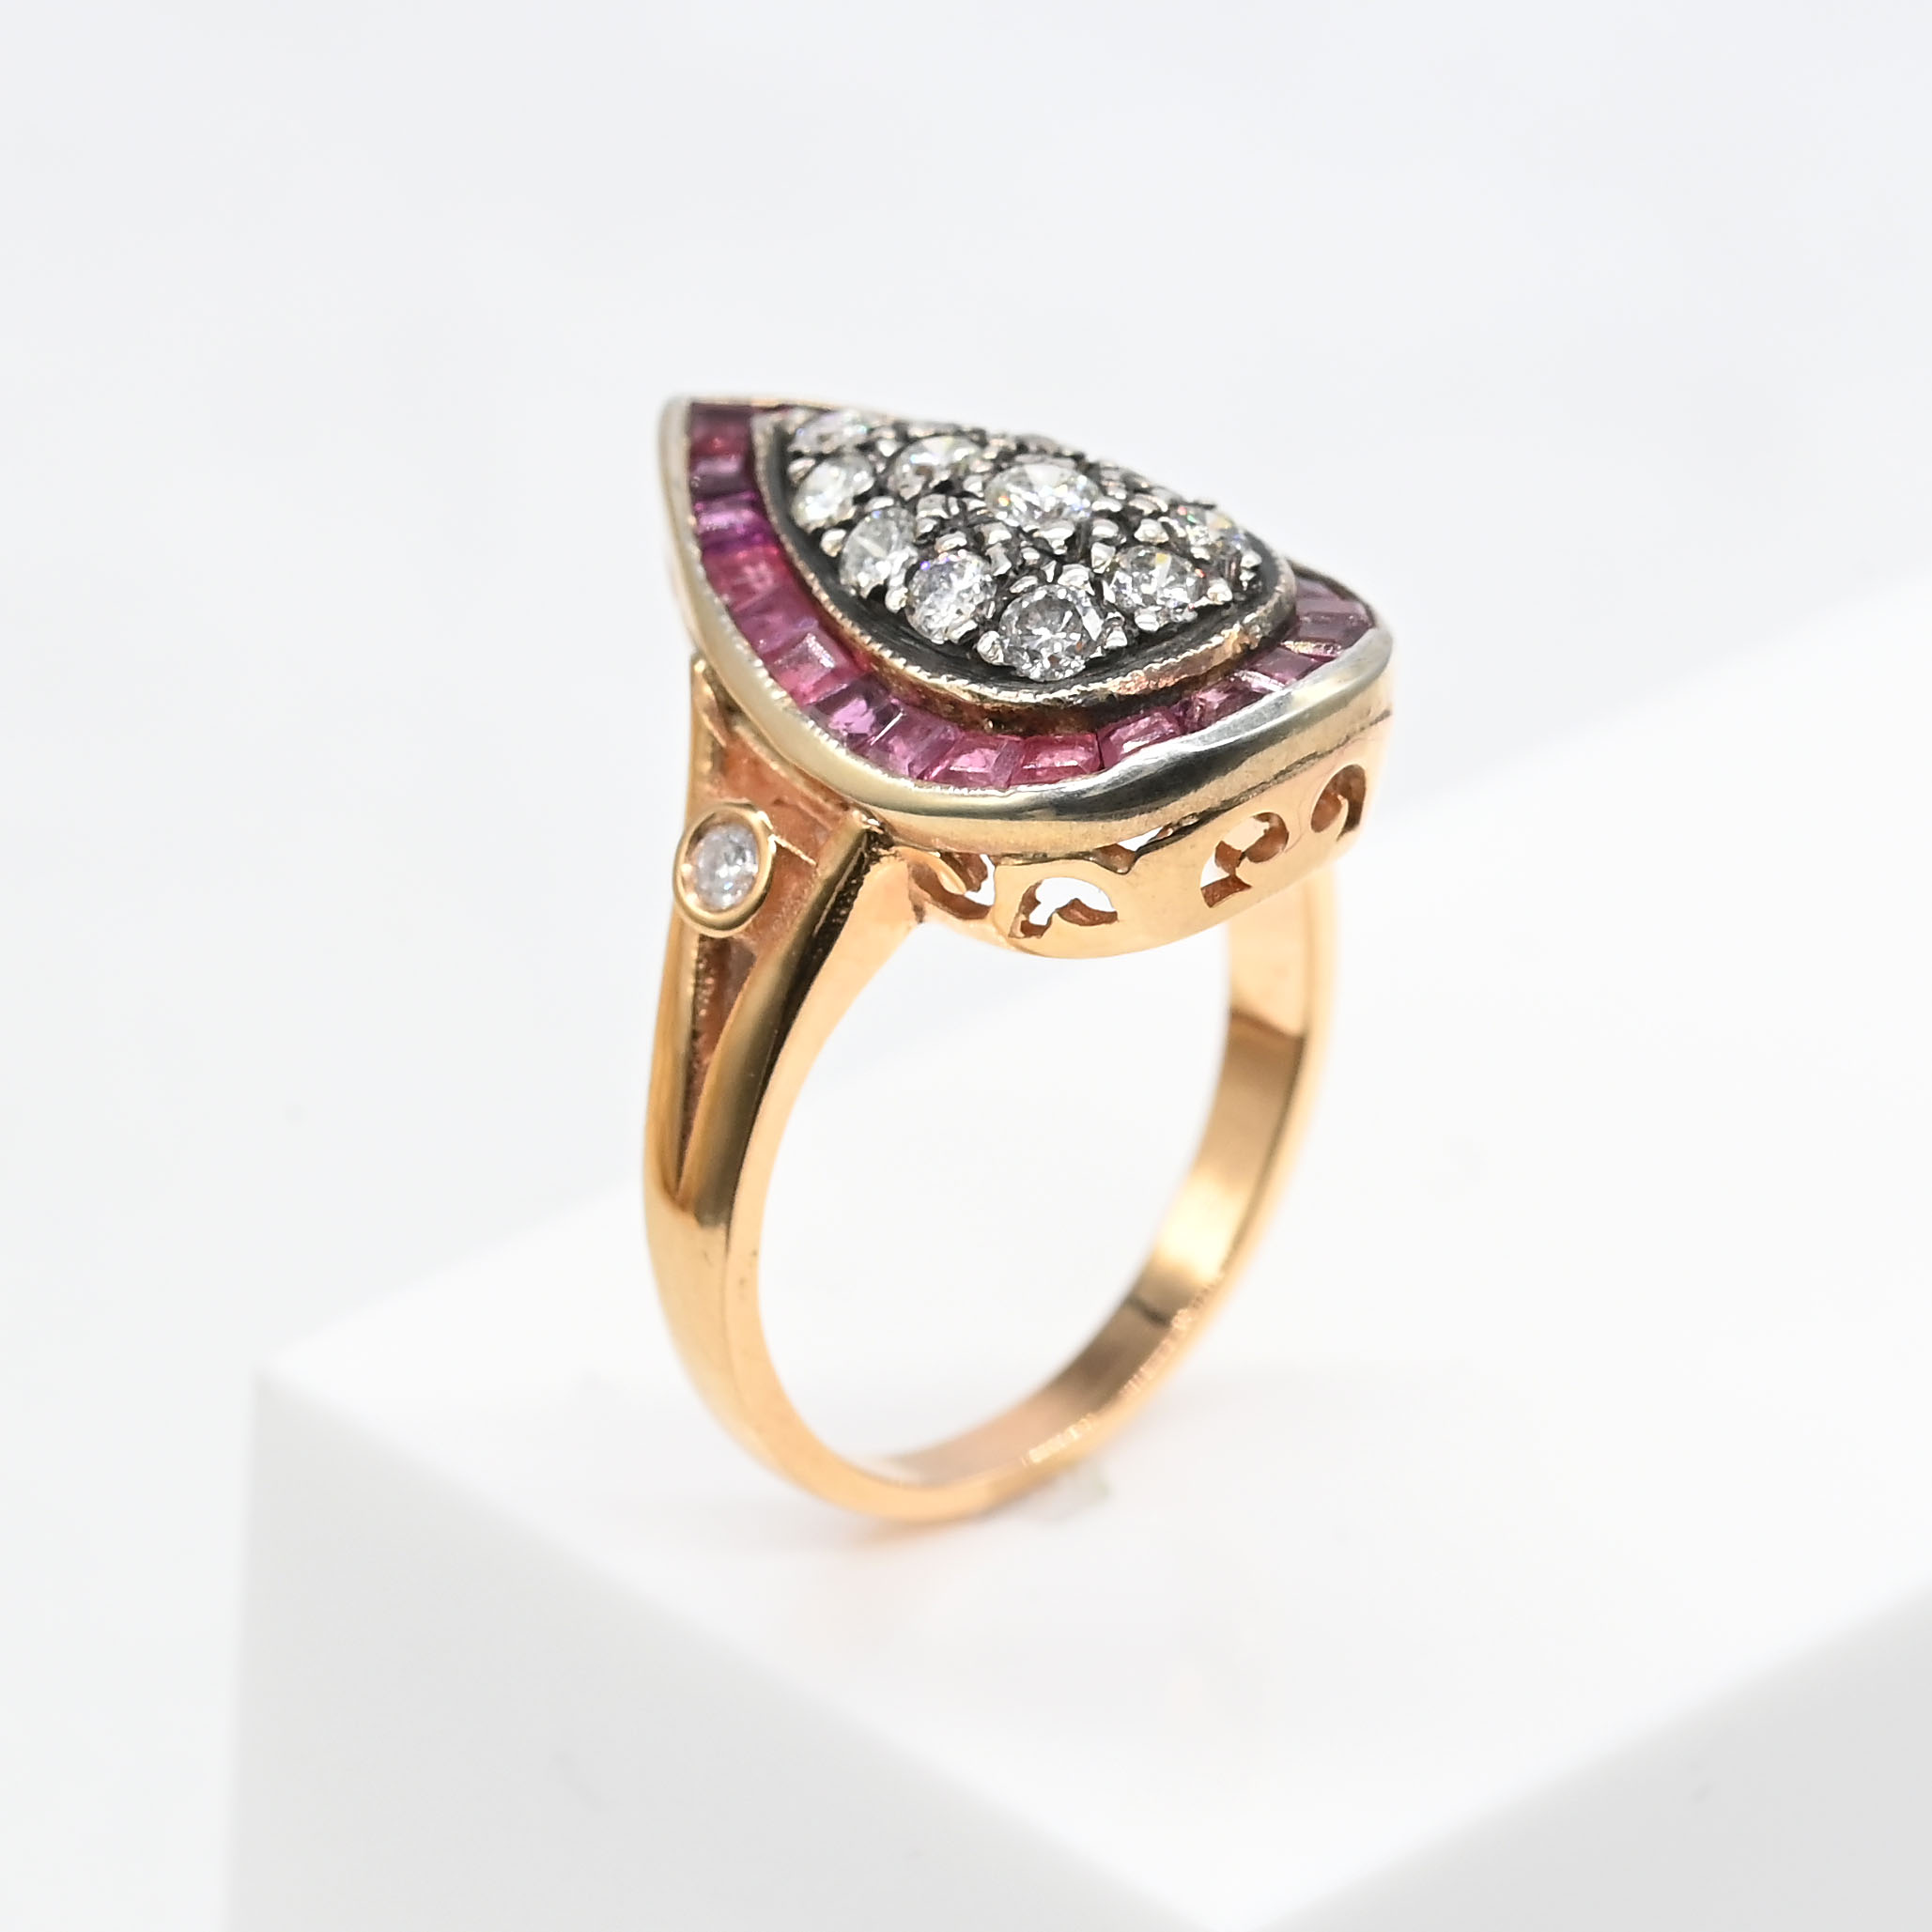 Hand-Made, Vintage Style Ruby and Diamond Pear-Shaped Ring - Image 6 of 8